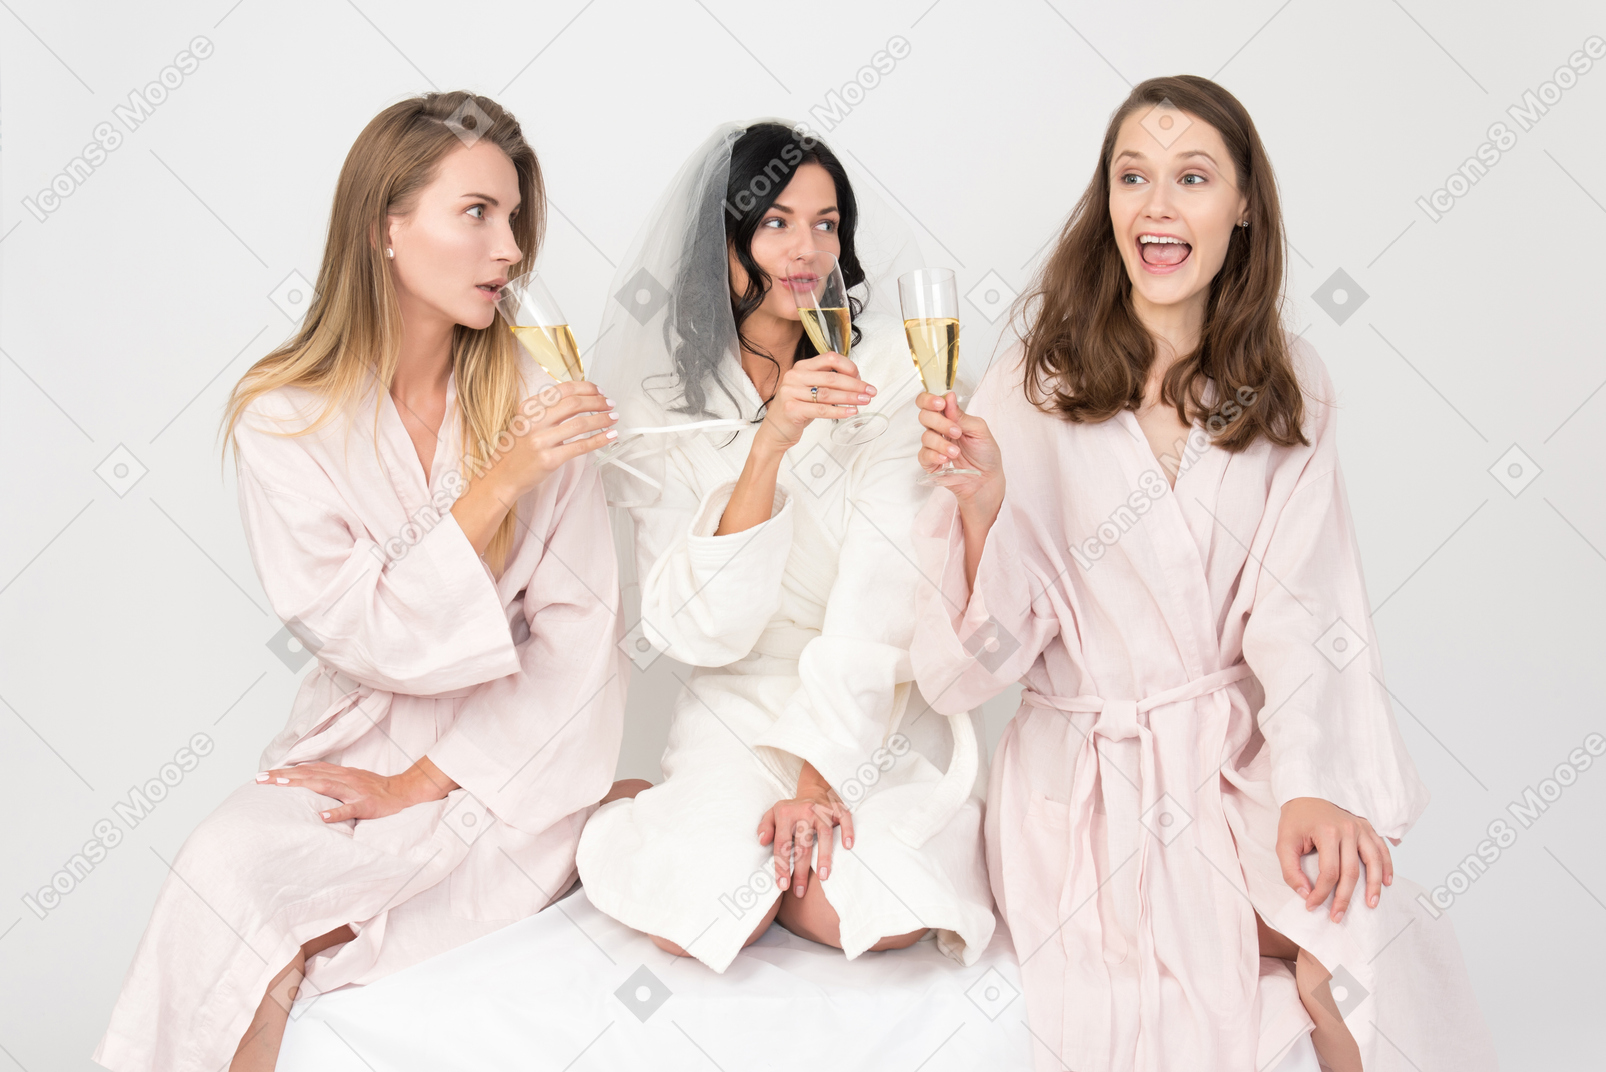 Bride and bridesmaids celebrating hen party and drinking champagne